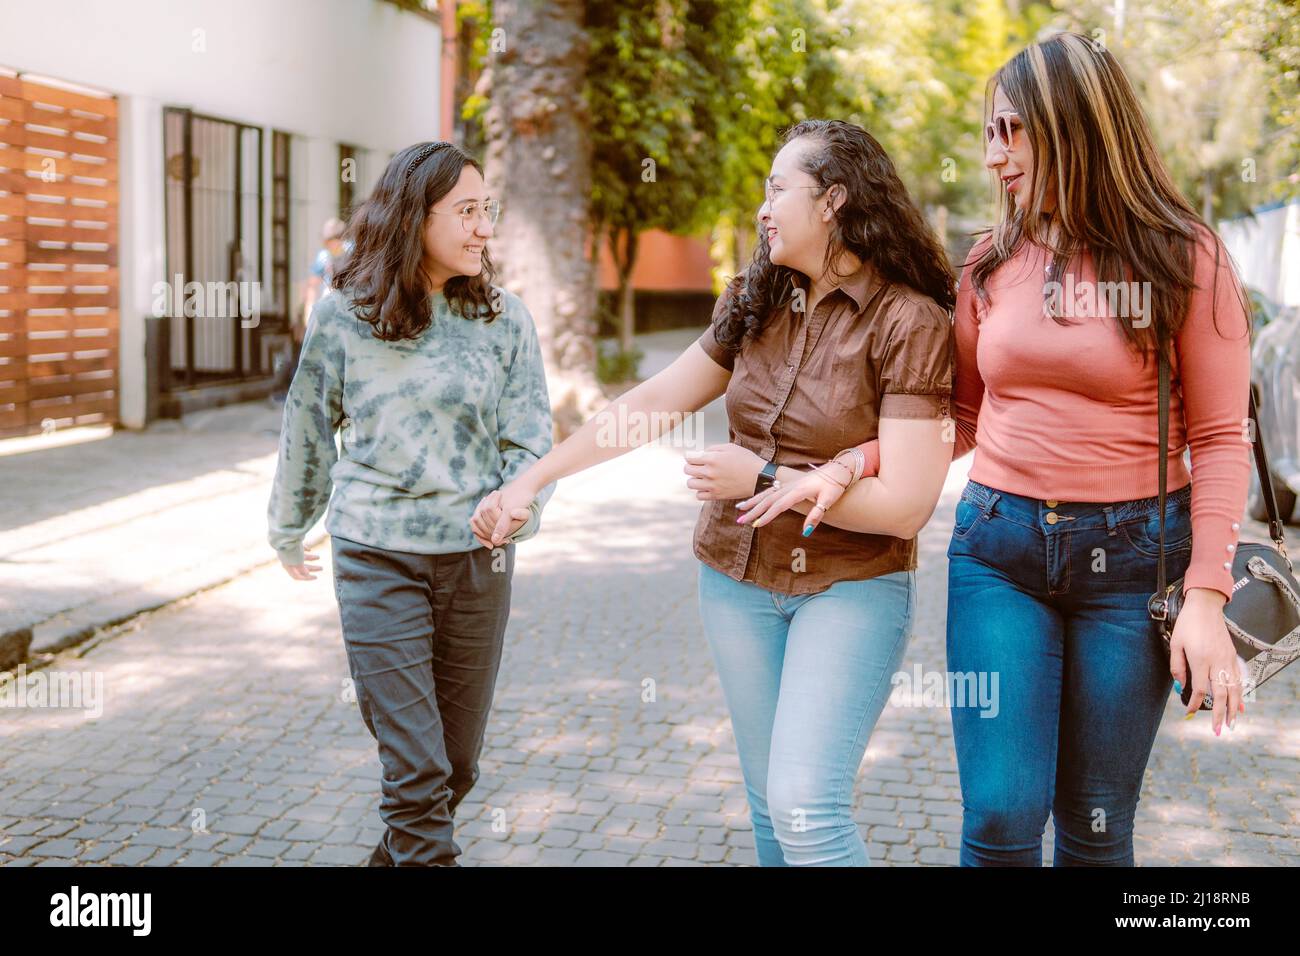 Three young women are walking down the street, they are smiling, playing and having a good time. Stock Photo